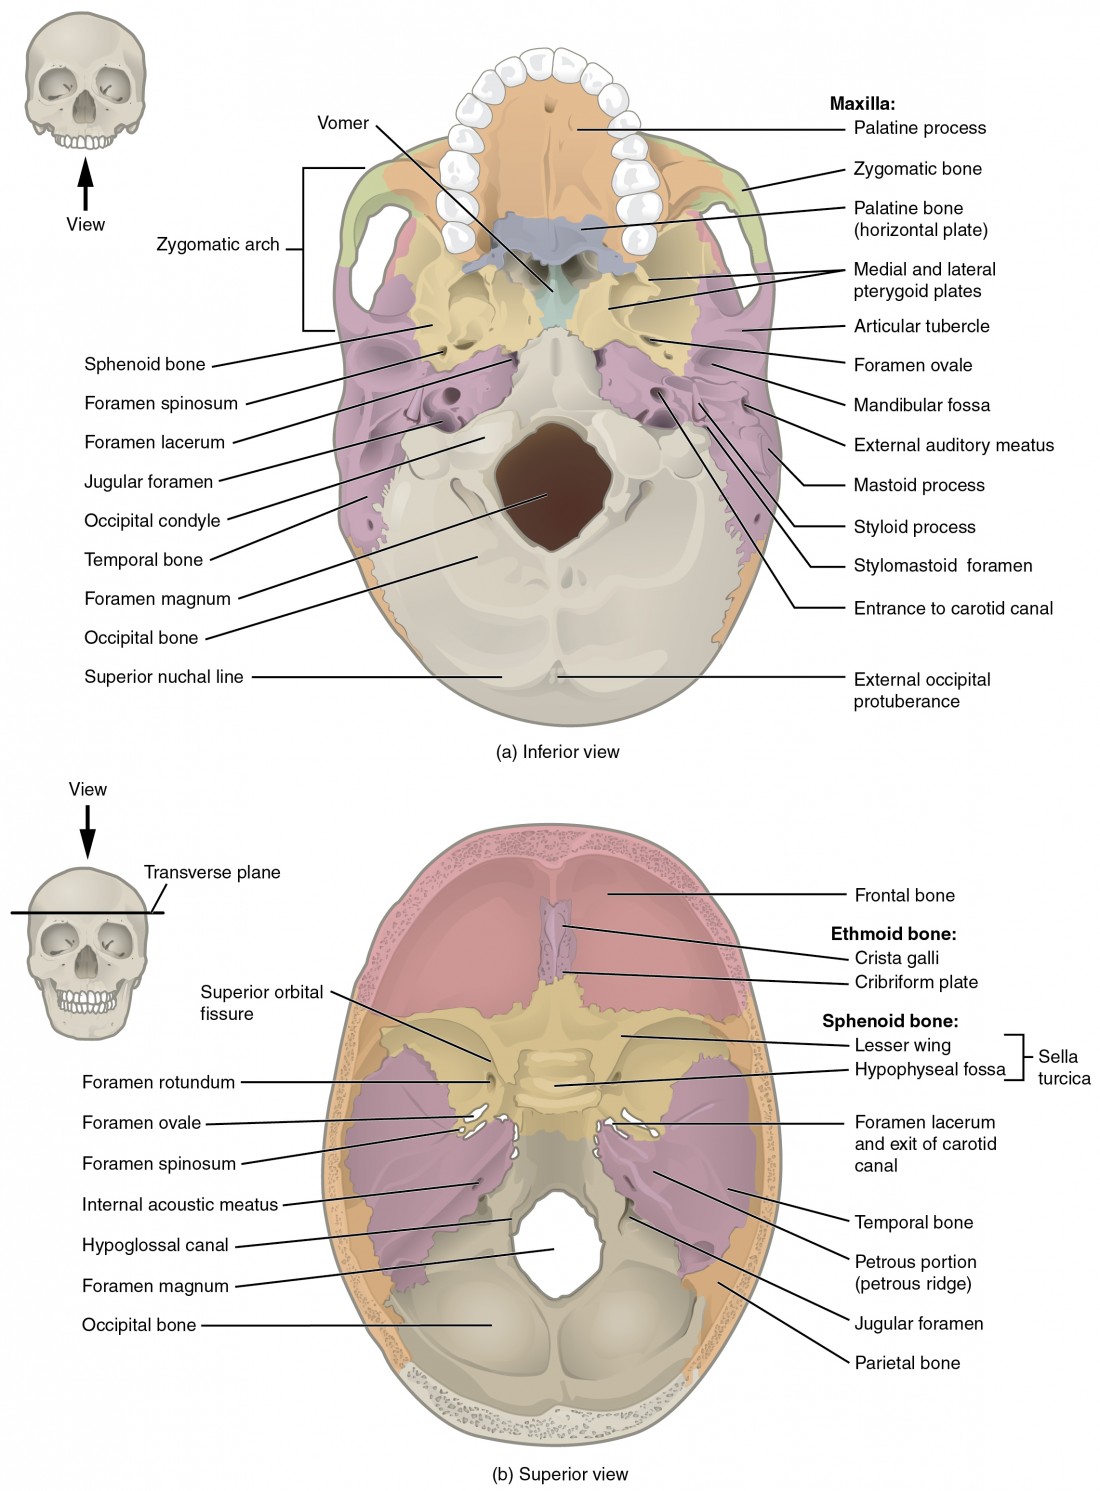 The Skull Anatomy And Physiology Course Hero 2832